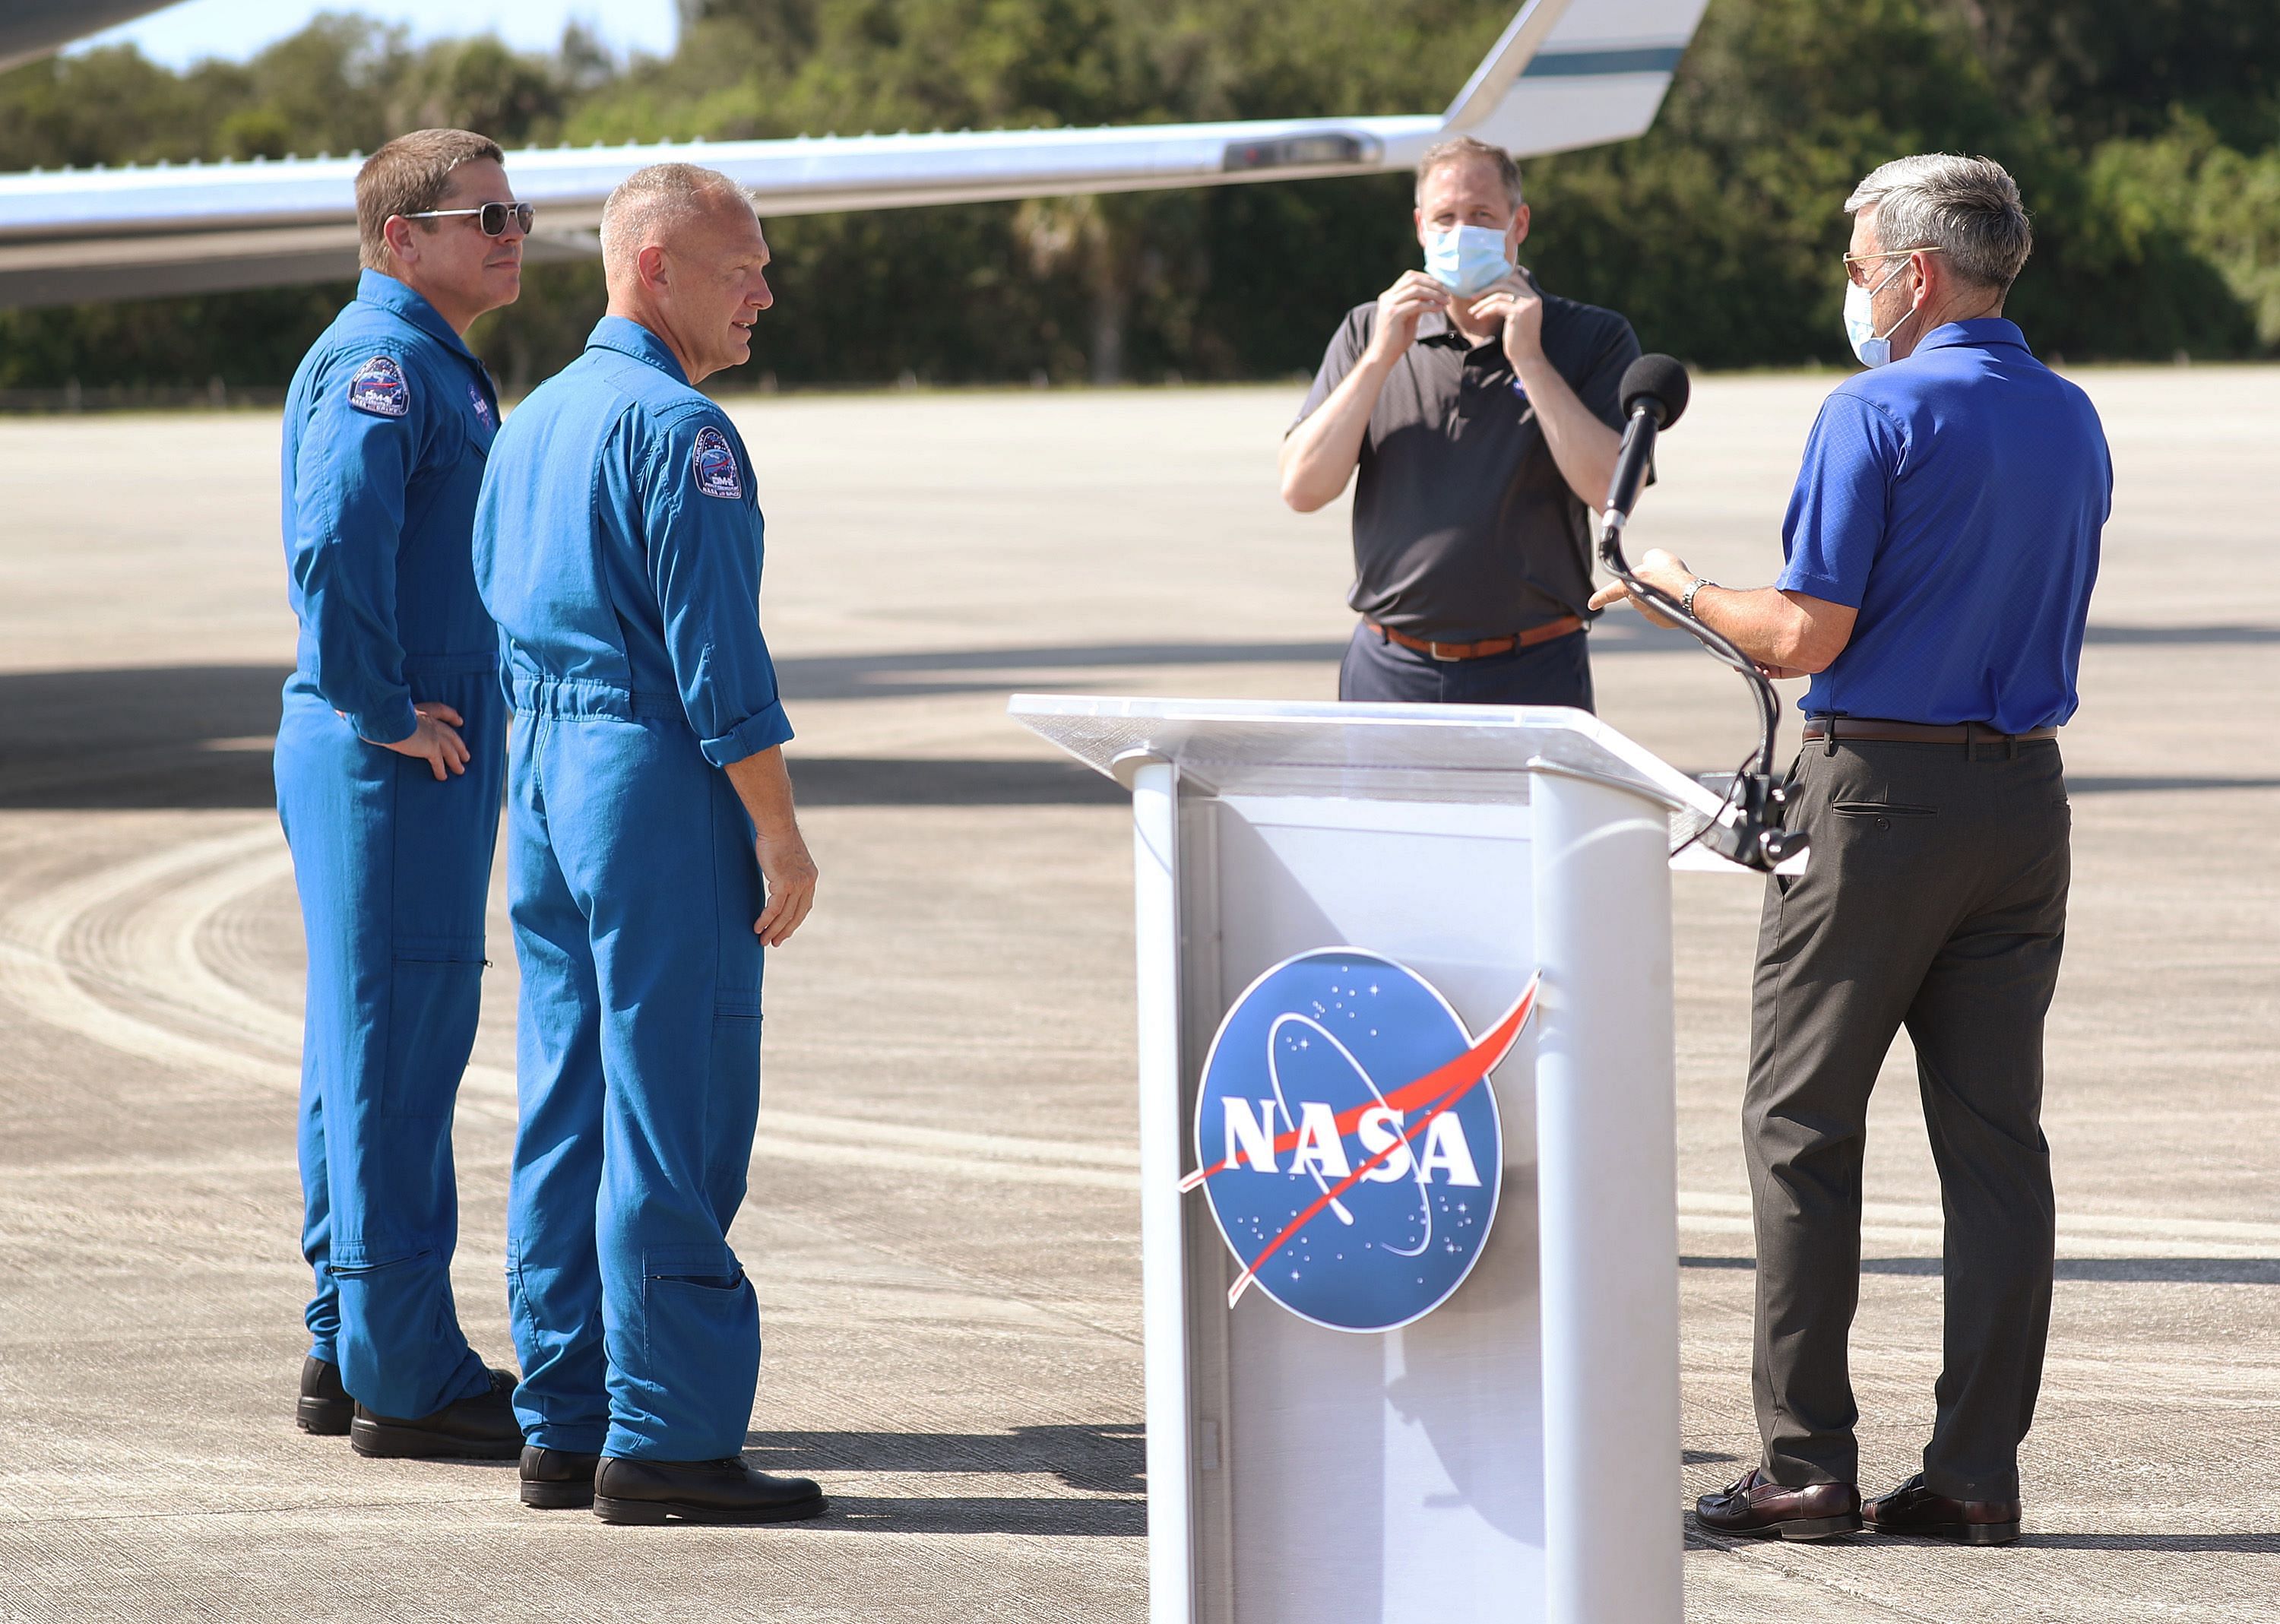 NASA astronauts Bob Behnken (left) and Doug Hurley (2nd left) speak with NASA Administrator Jim Bridenstine (C) and Robert Cabana (right), the director of NASA's John F. Kennedy Space Center, after arriving at the Kennedy Space Center on May 20, 2020 in Cape Canaveral, Florida. The astronauts arrived for the May 27th scheduled inaugural flight of SpaceXs Crew Dragon spacecraft. They will be the first people since the end of the Space Shuttle program in 2011 to be launched into space from the United States. (Joe Raedle/Getty Images/AFP)